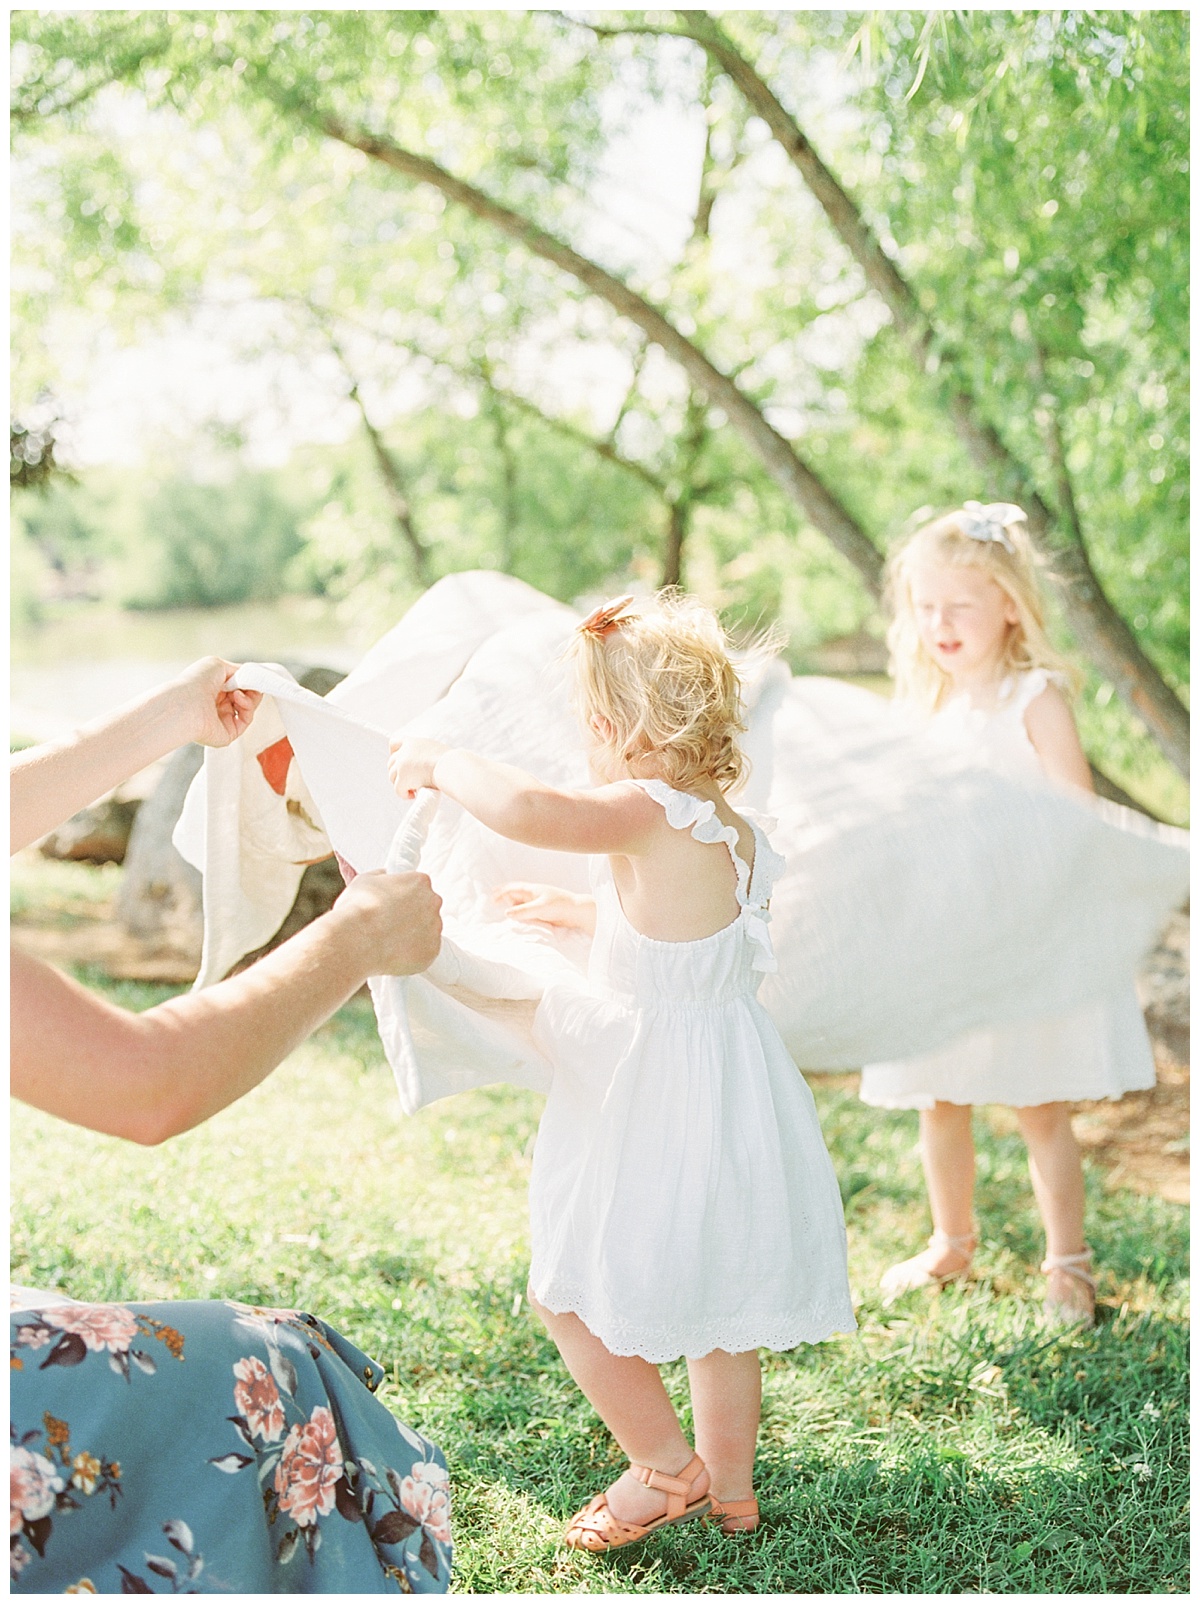 Family Photography in Murfreesboro Tn by Grace Paul Photography.